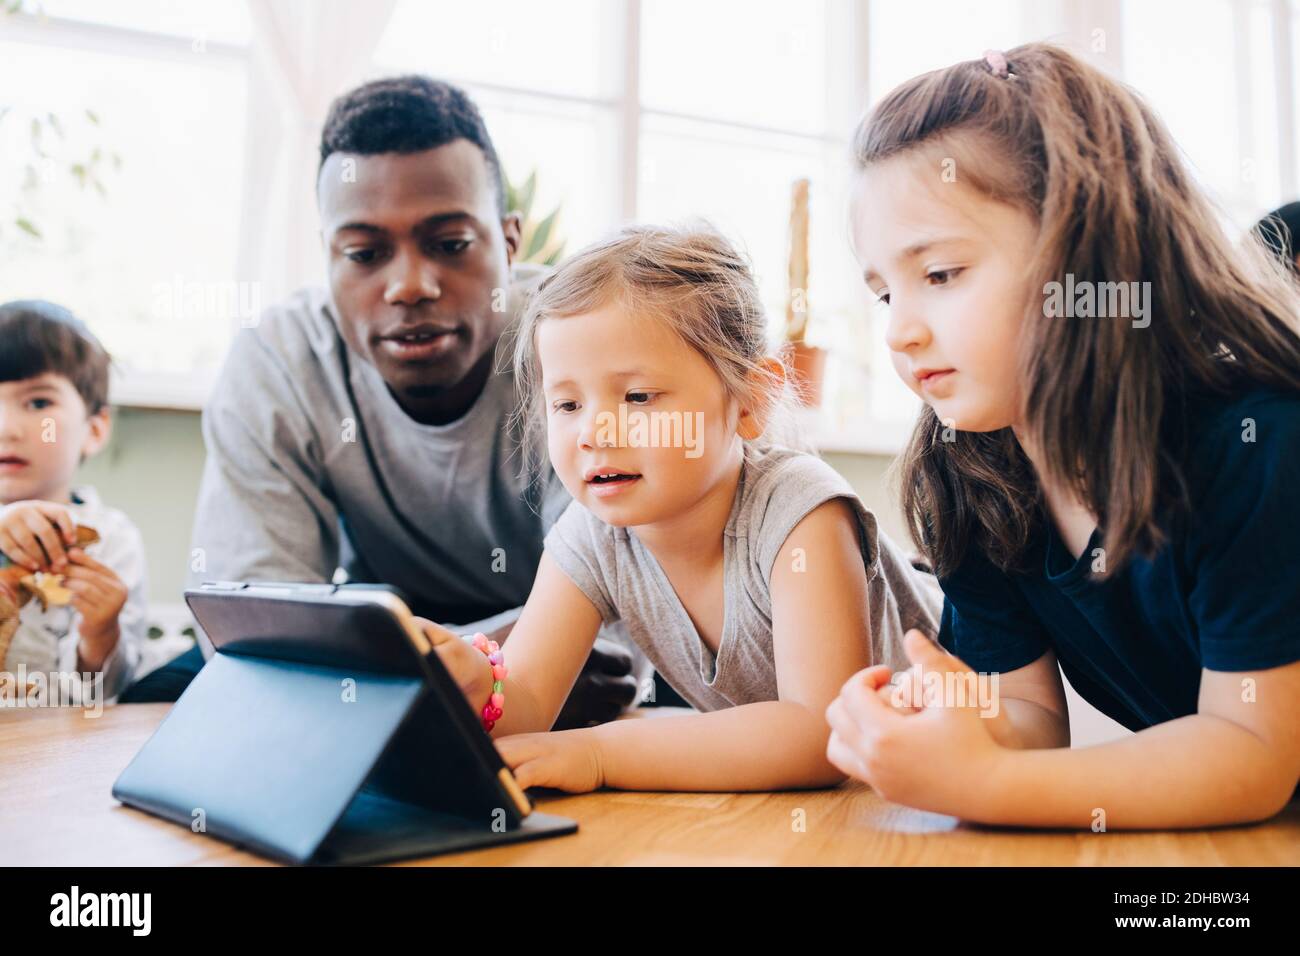 Male teacher looking at girl using digital tablet by friend at table in classroom Stock Photo